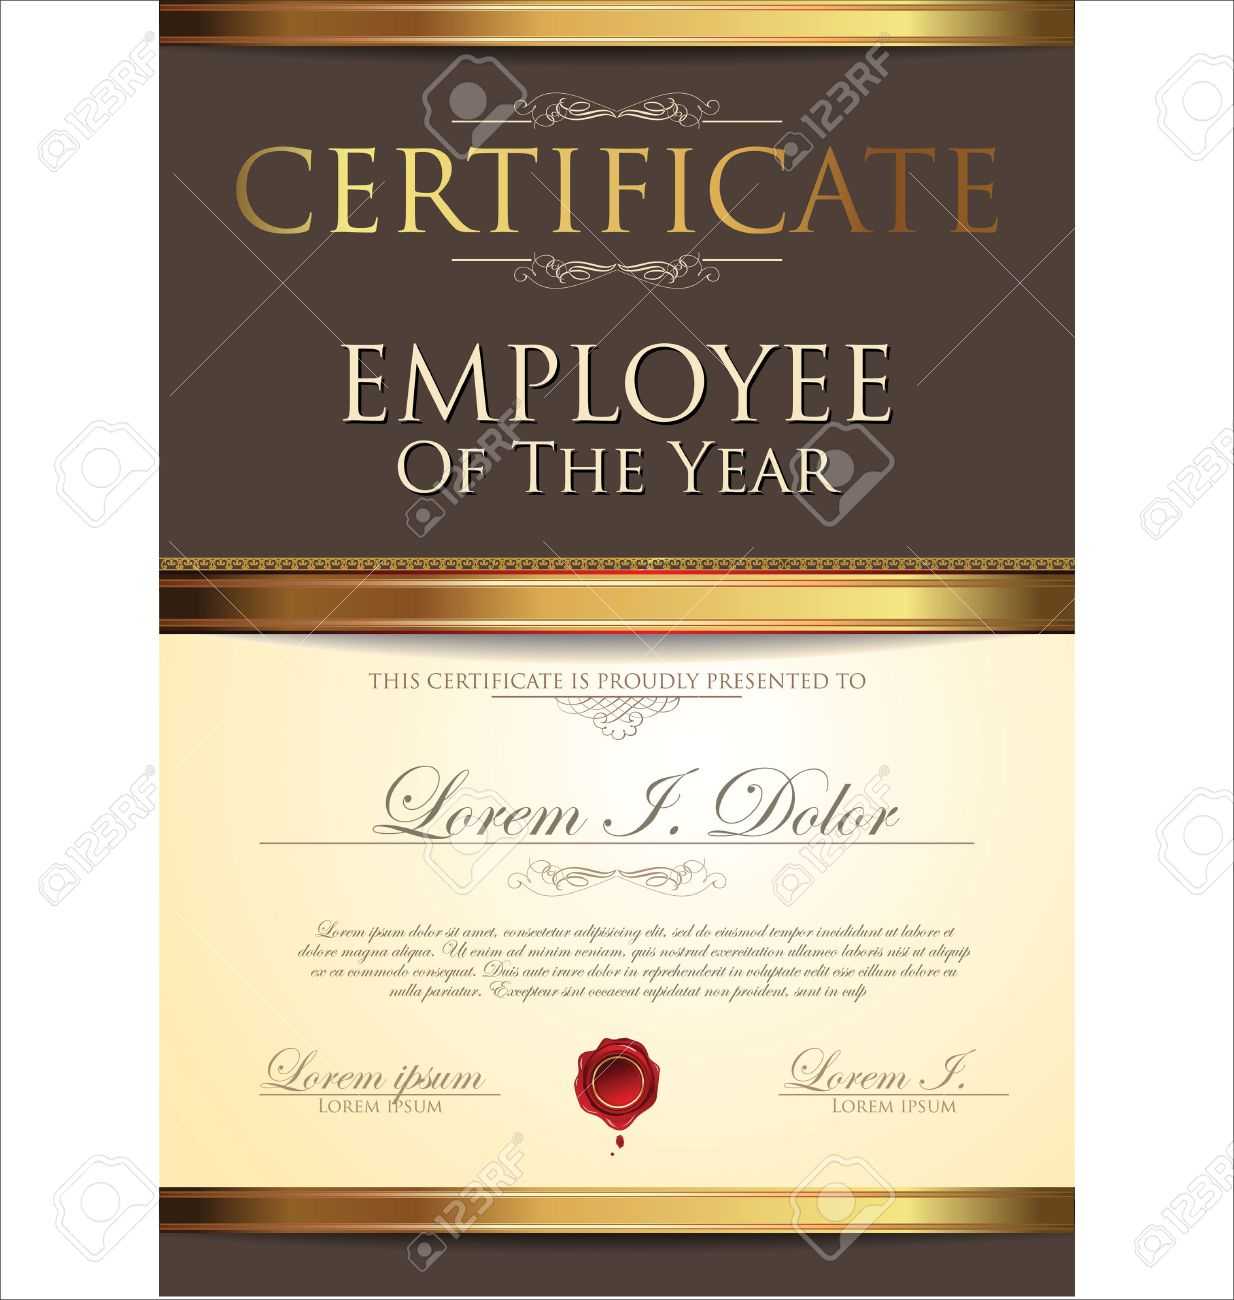 Certificate Template, Employee Of The Year With Employee Of The Year Certificate Template Free